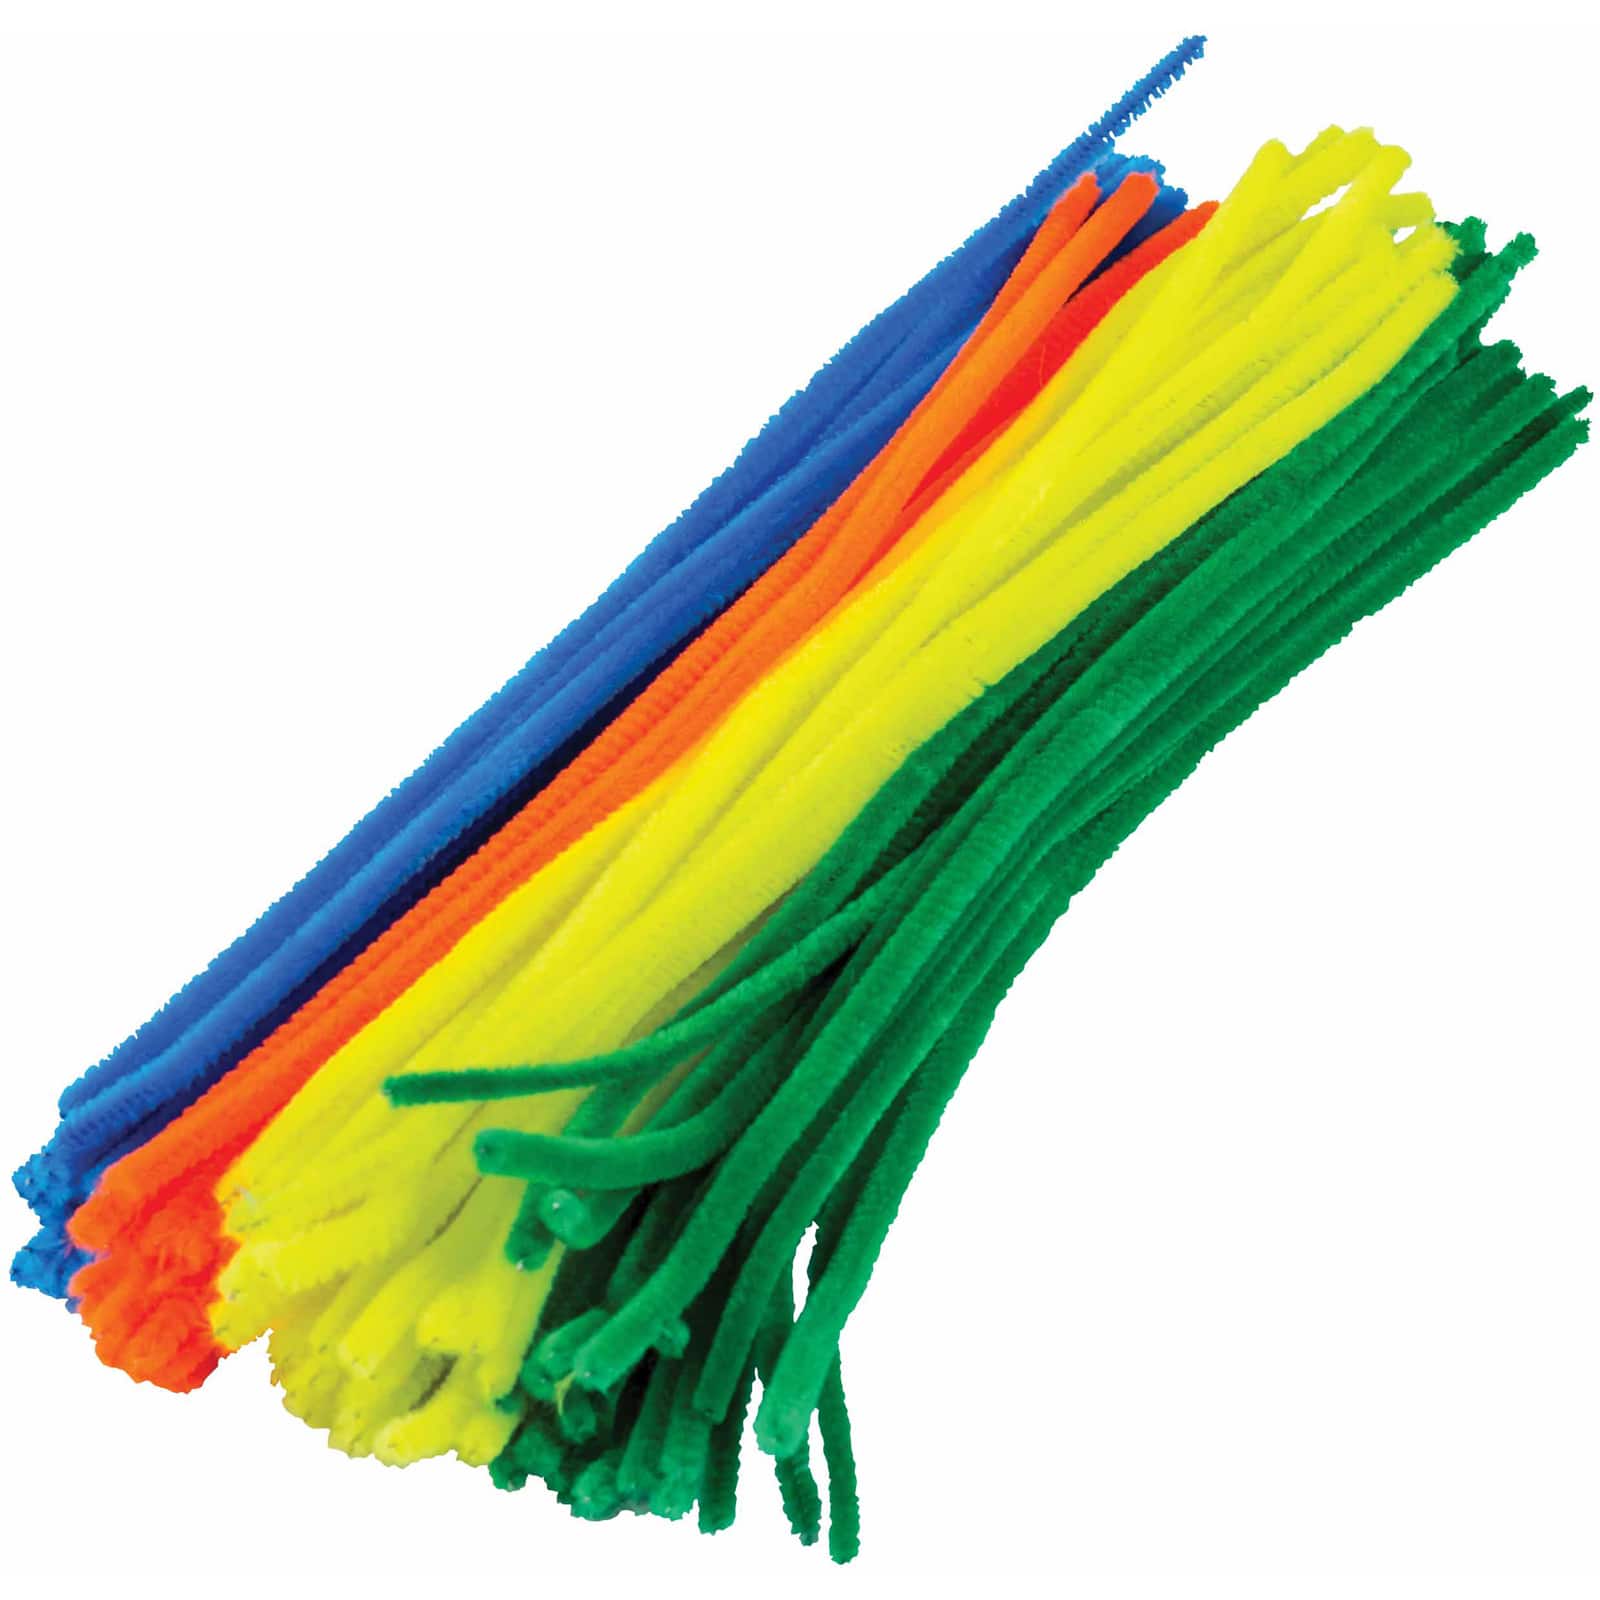 Teacher Created Resources STEM Basics Pipe Cleaners, 6 packs of 100